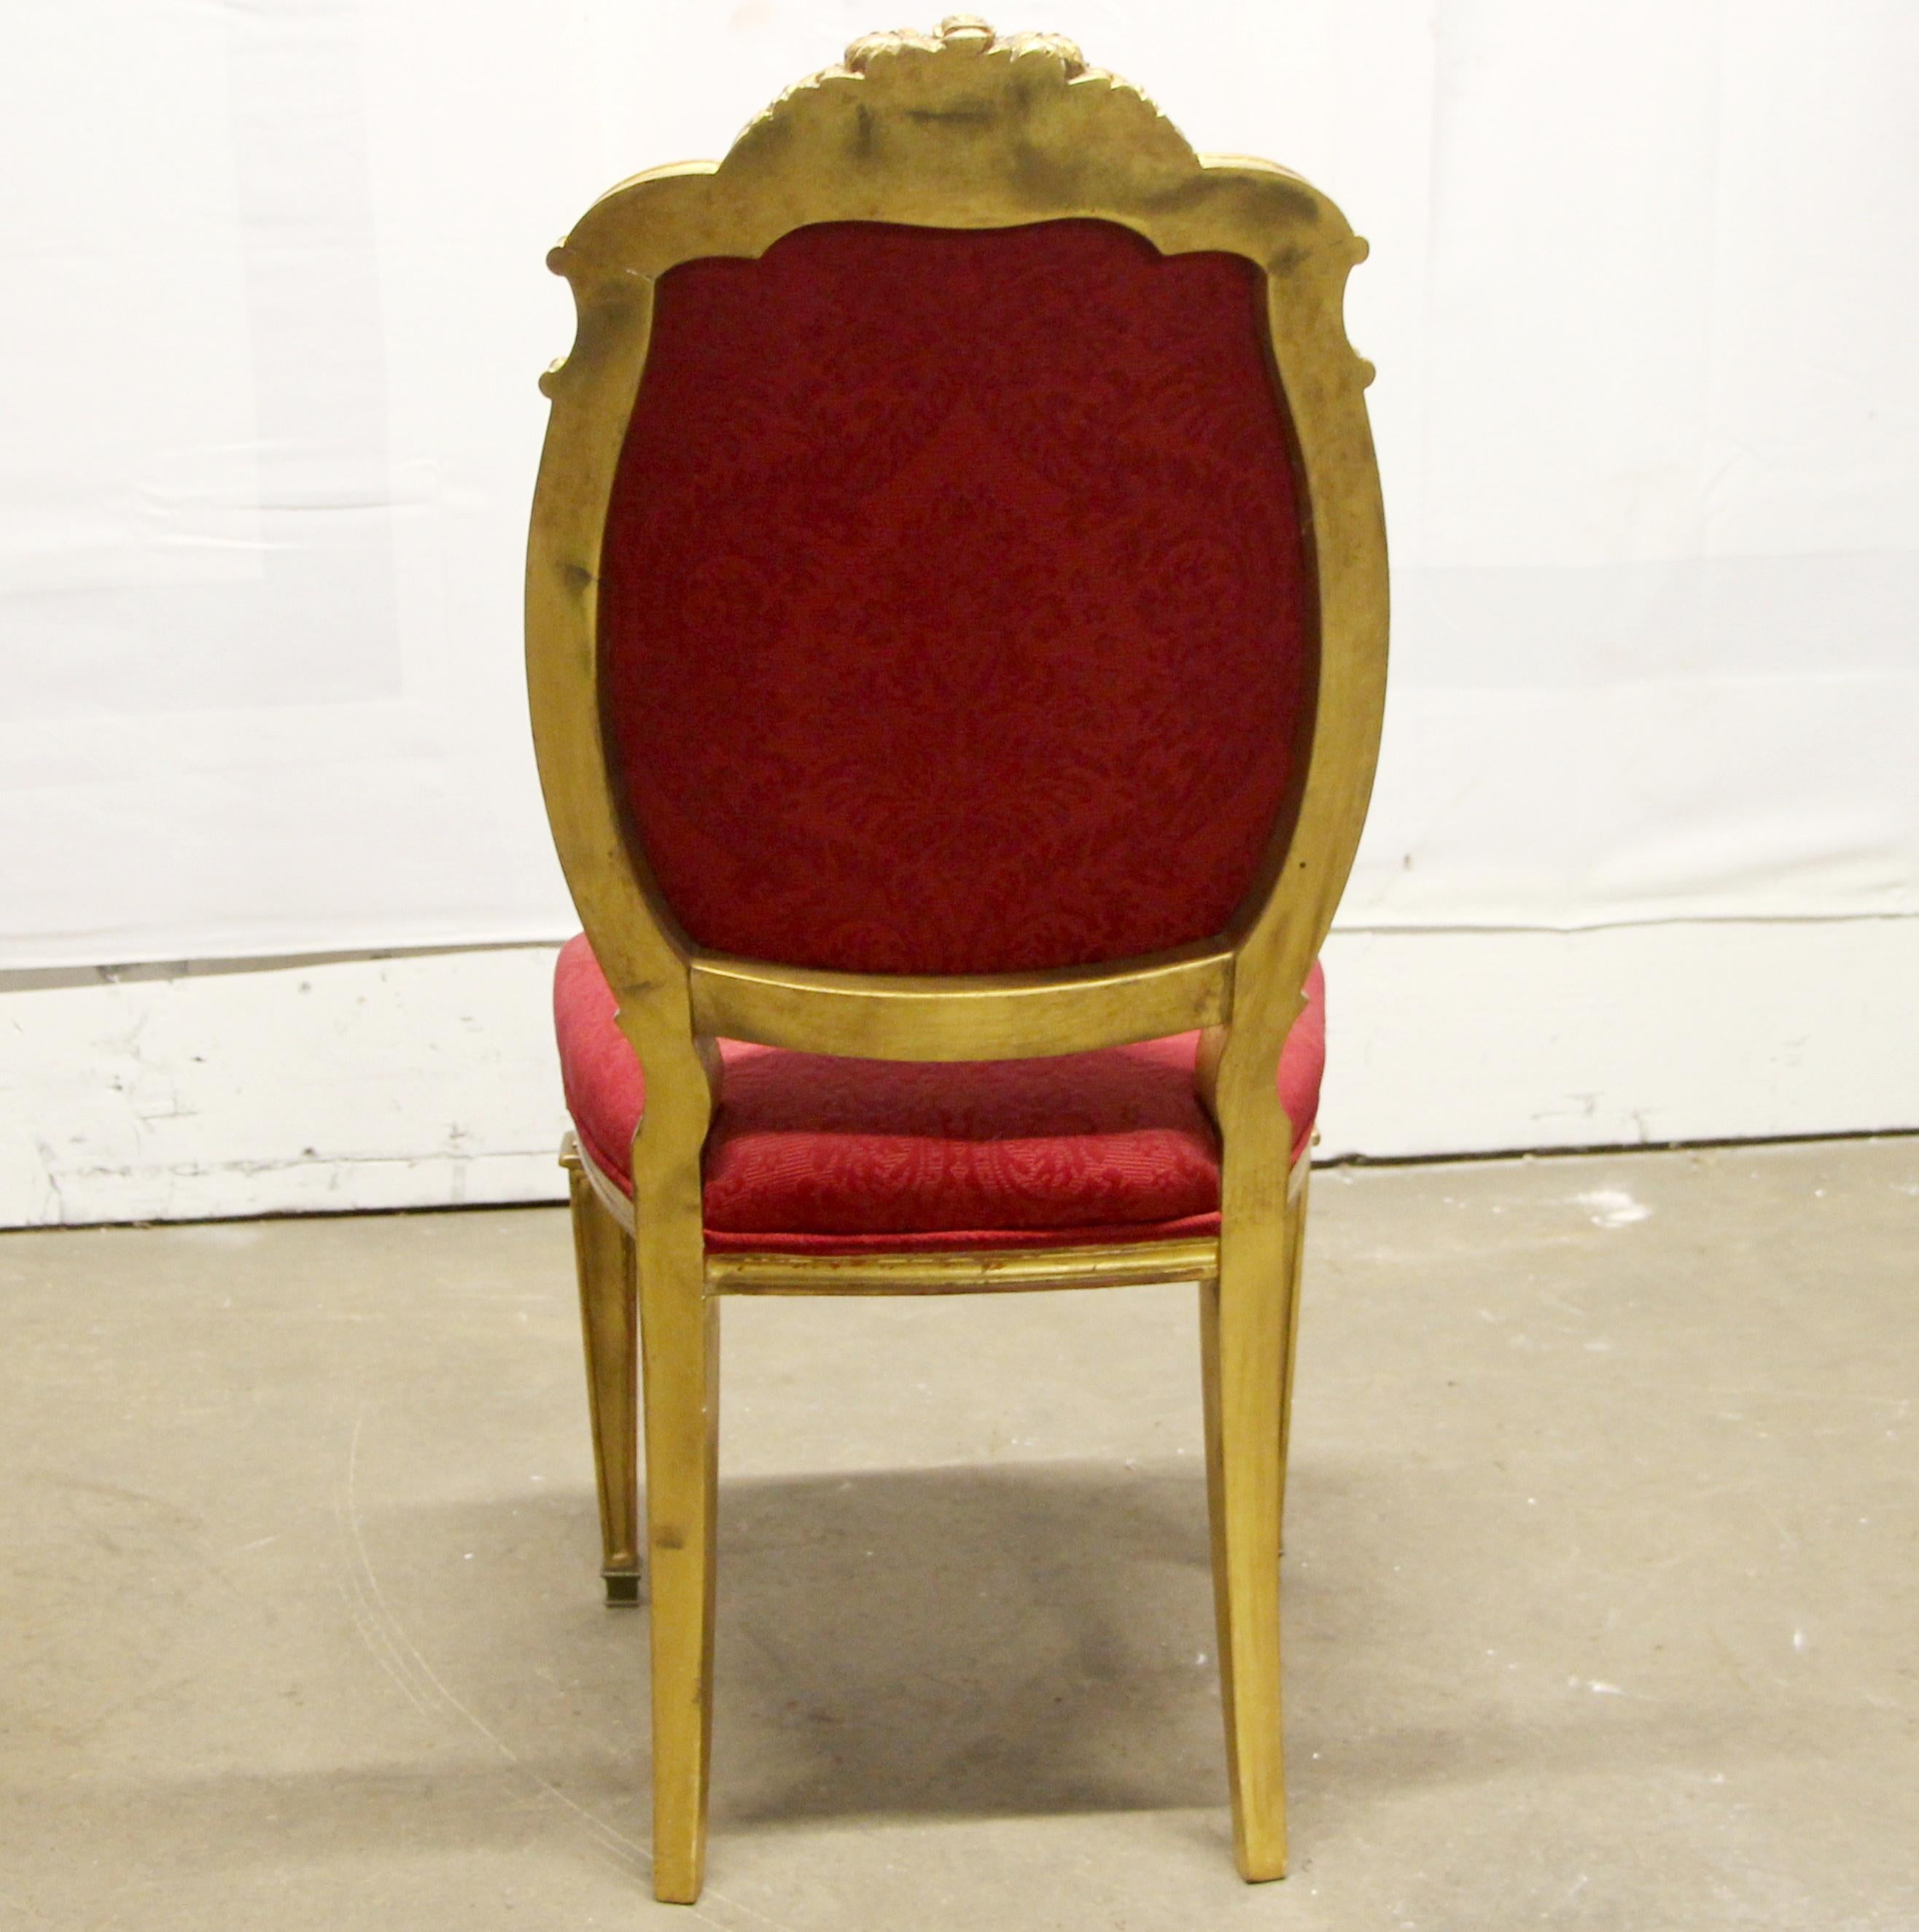 Early 20th Century 1920s French Chair Gilded Carved Wood Frame Red Floral Upholstery